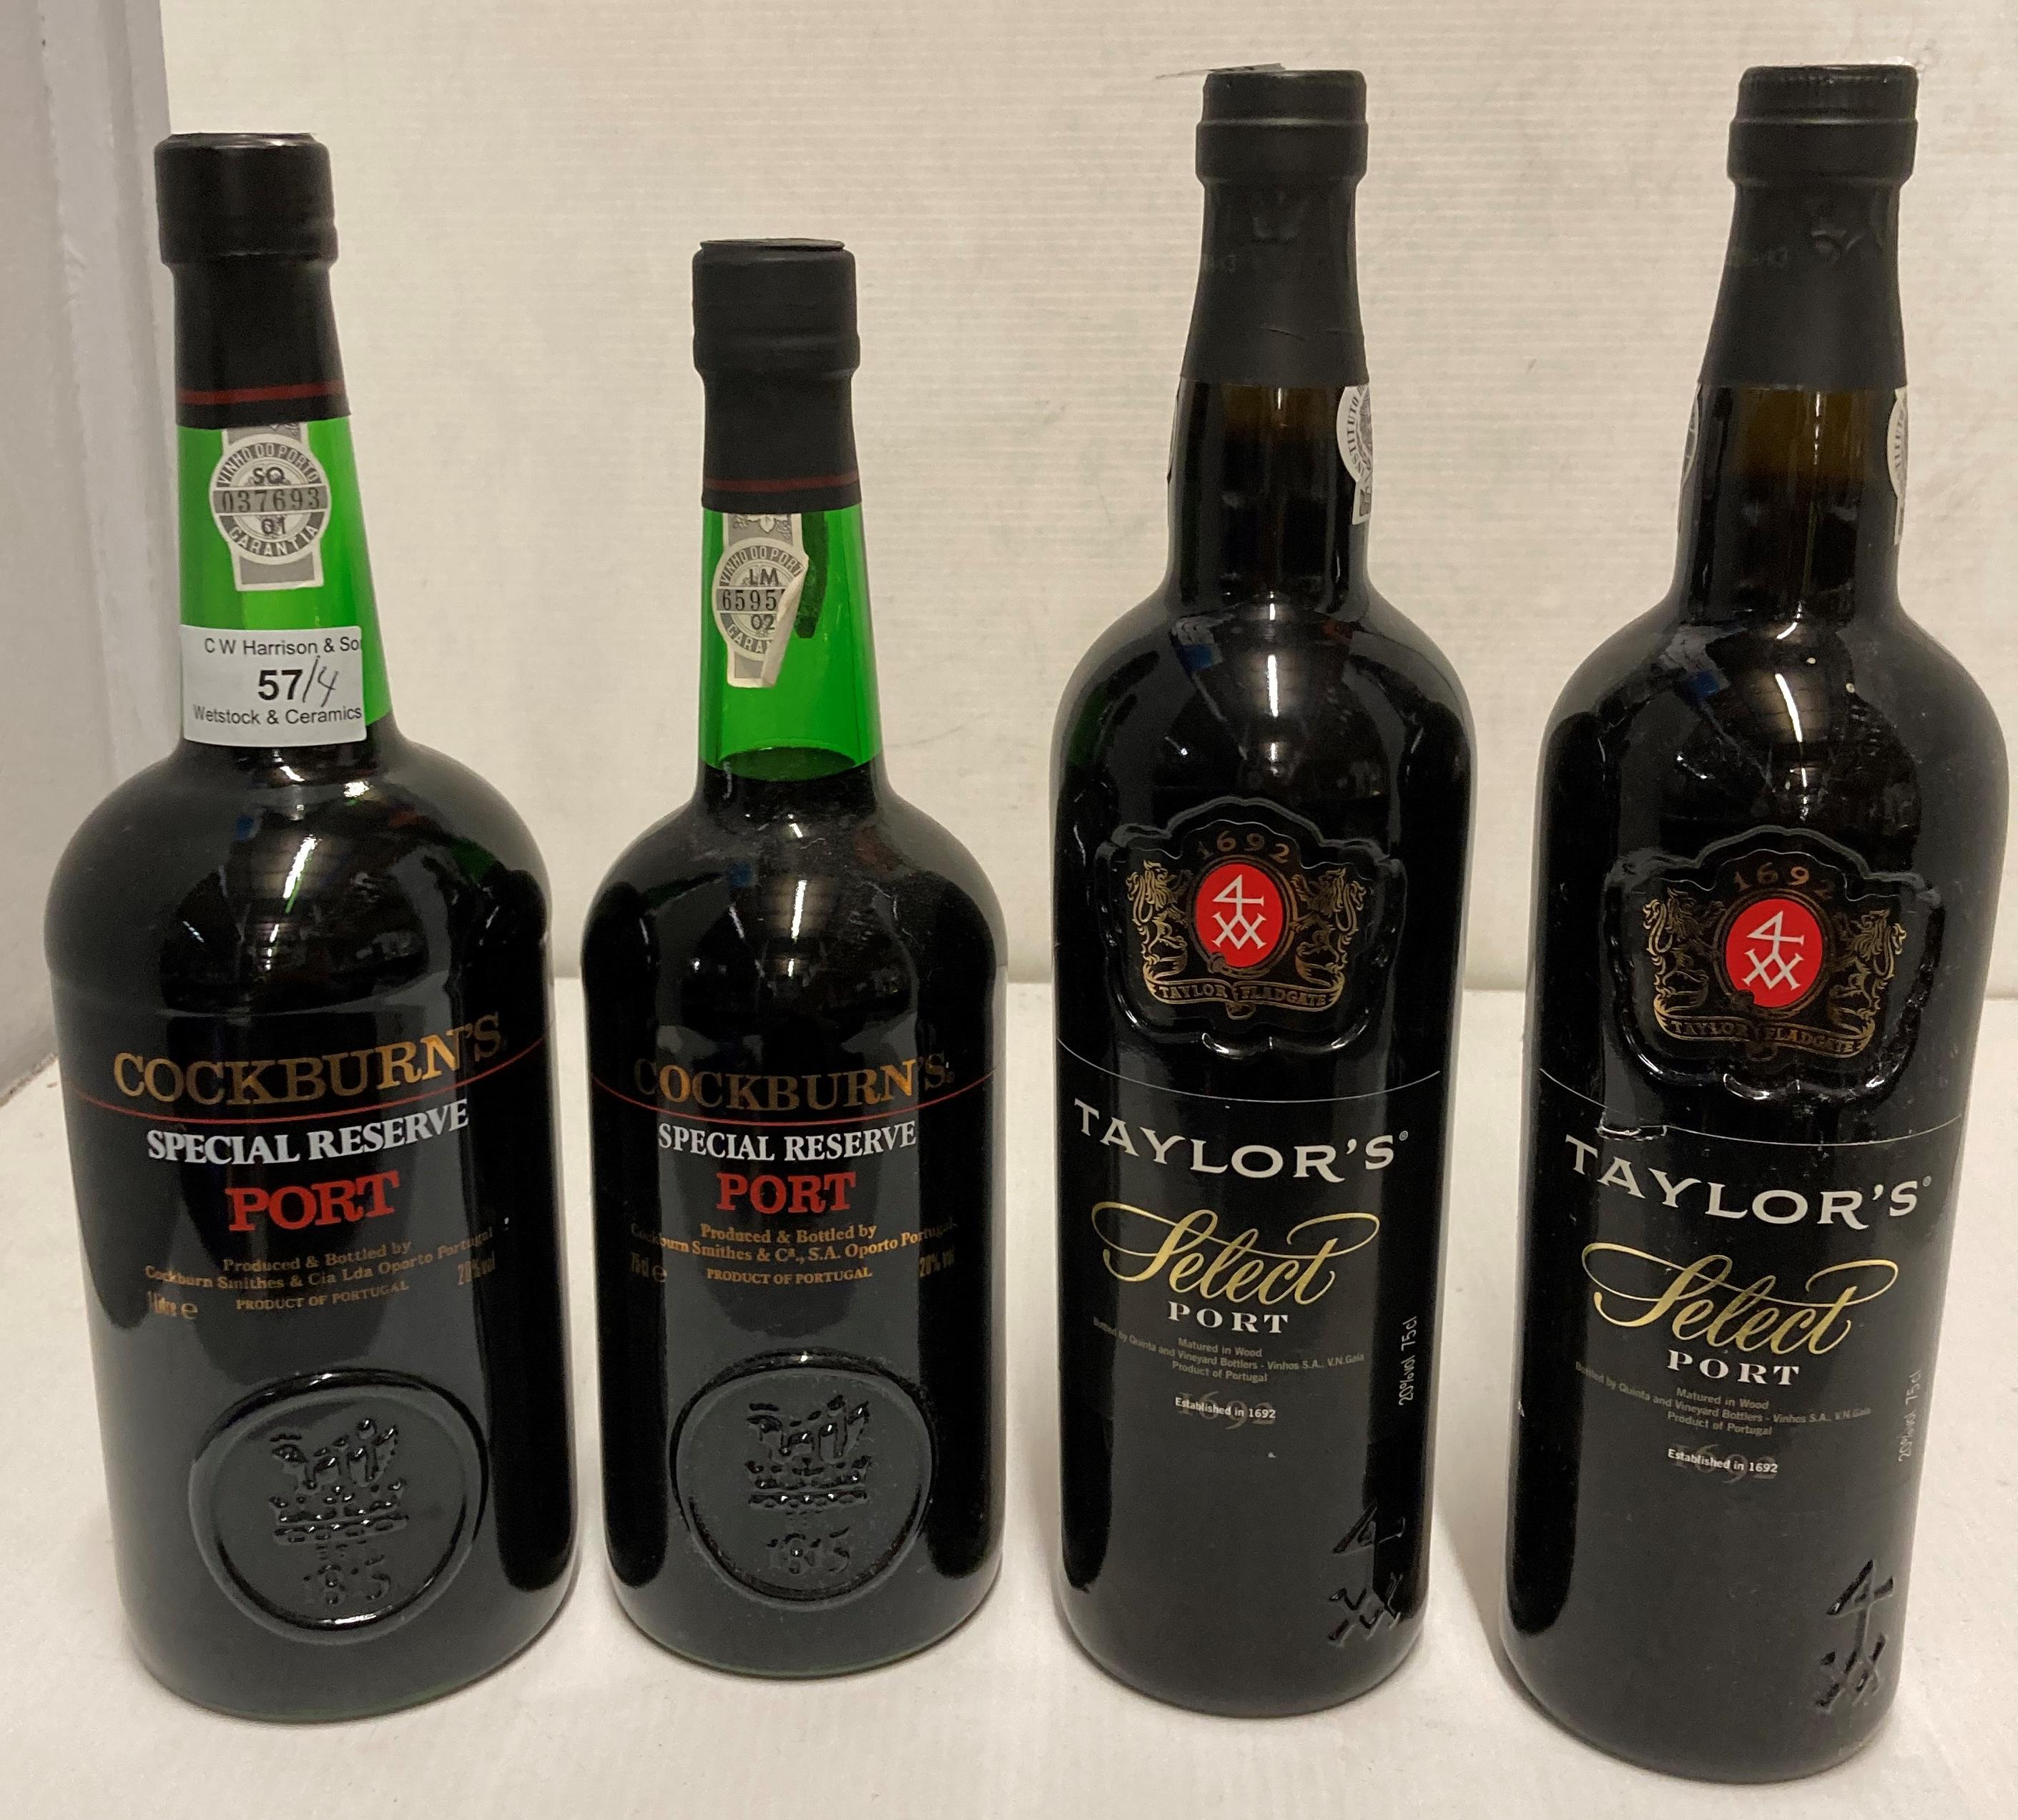 Two 75cl bottles of Taylor's 4XX Select Port and 75cl/one litre bottles of Cockburn's Special